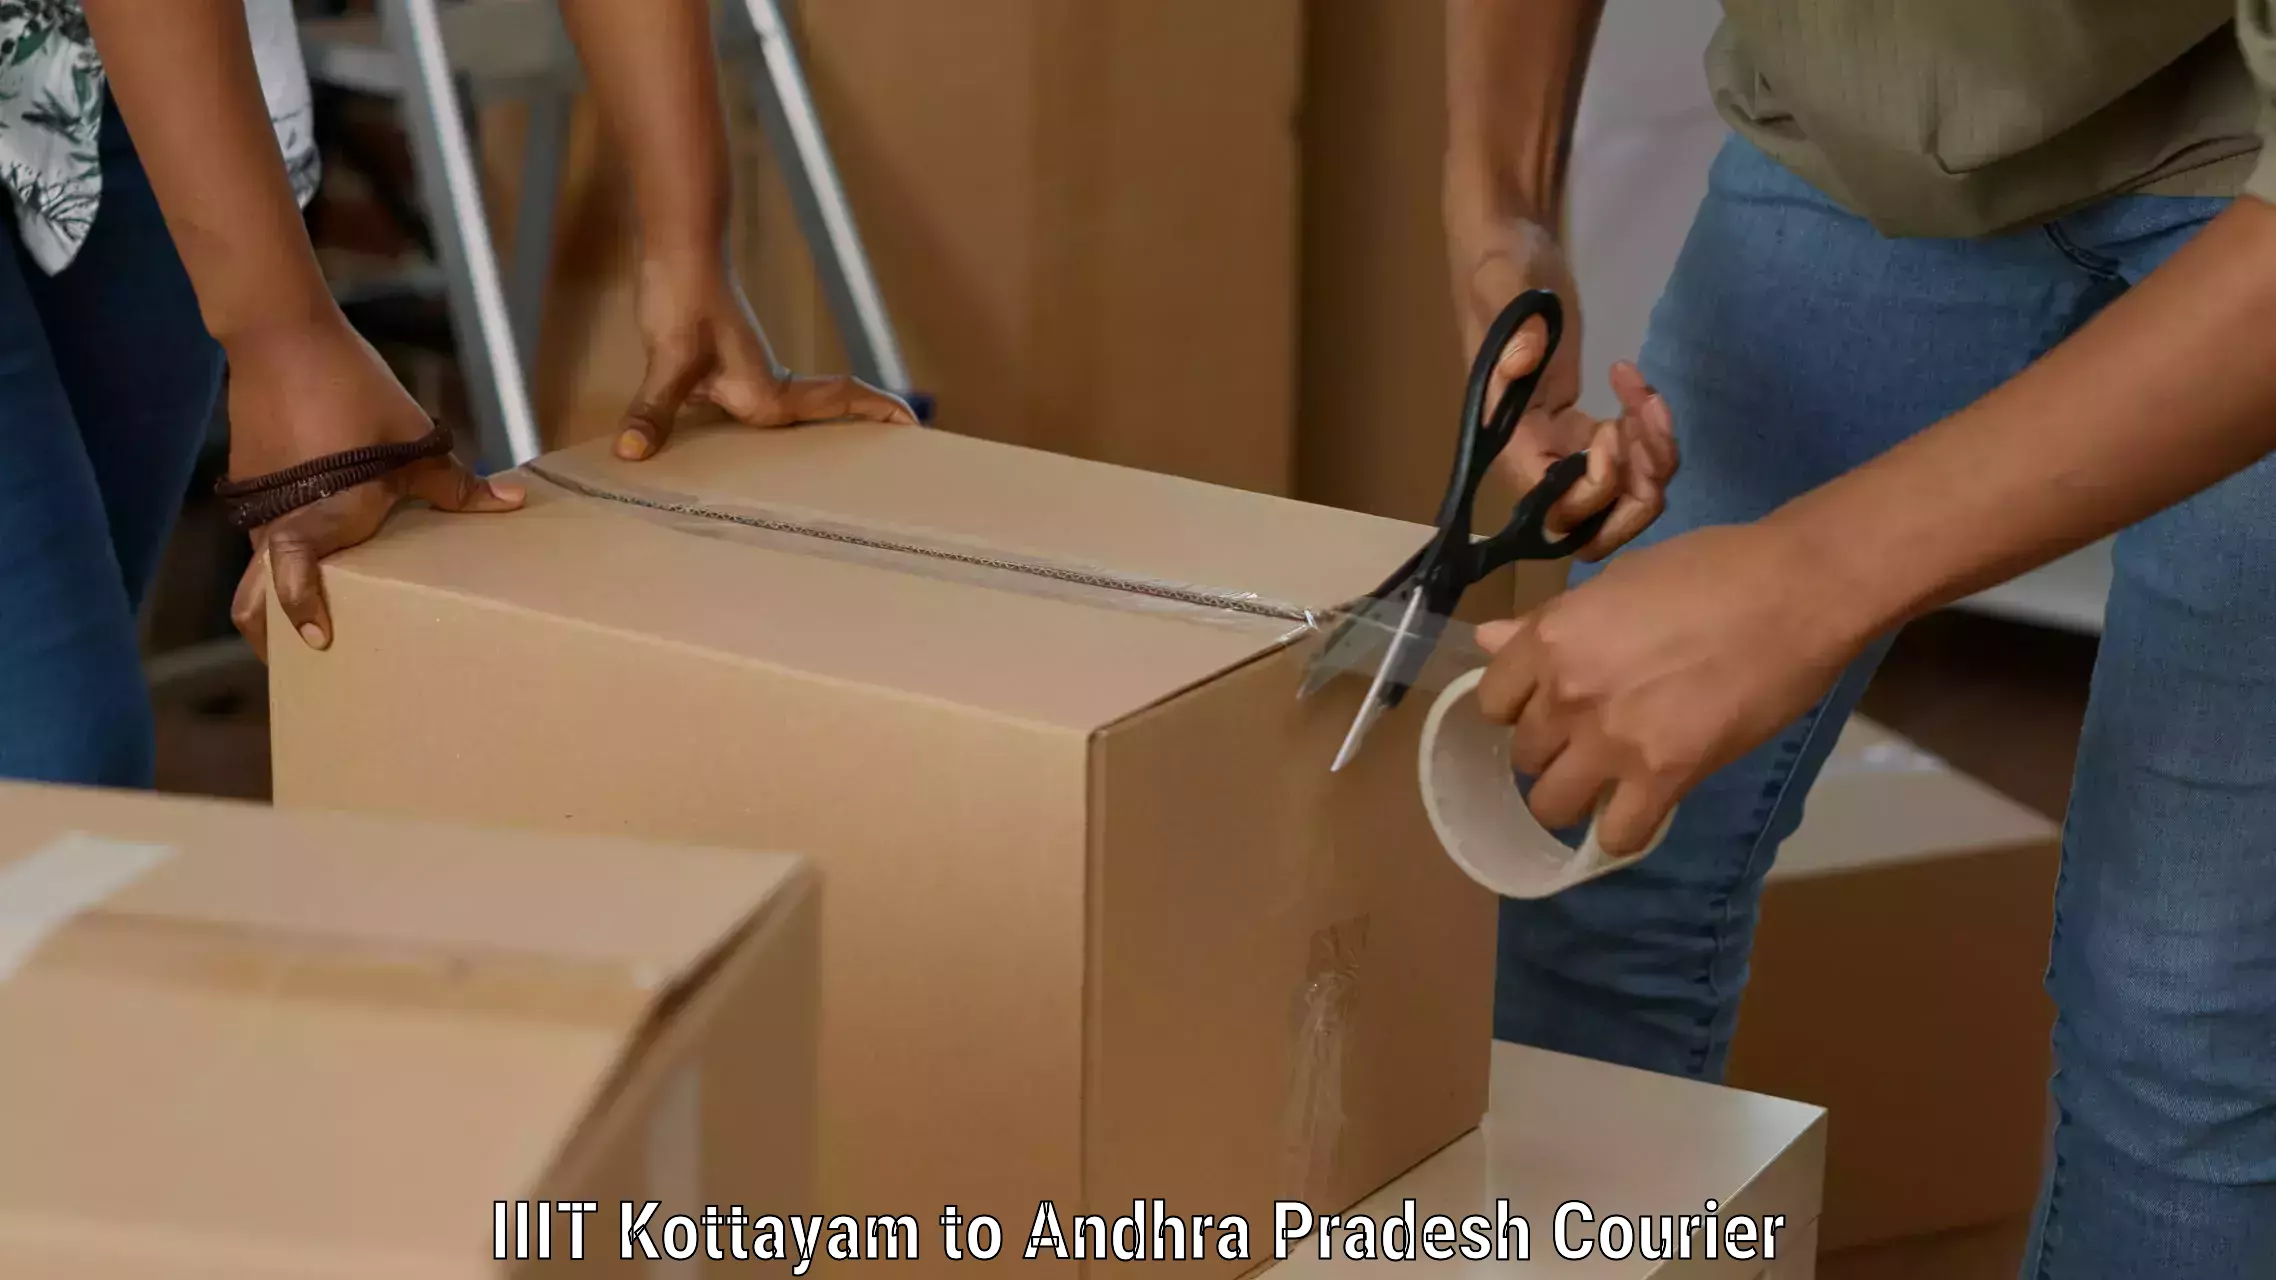 Professional courier services IIIT Kottayam to Parvathipuram